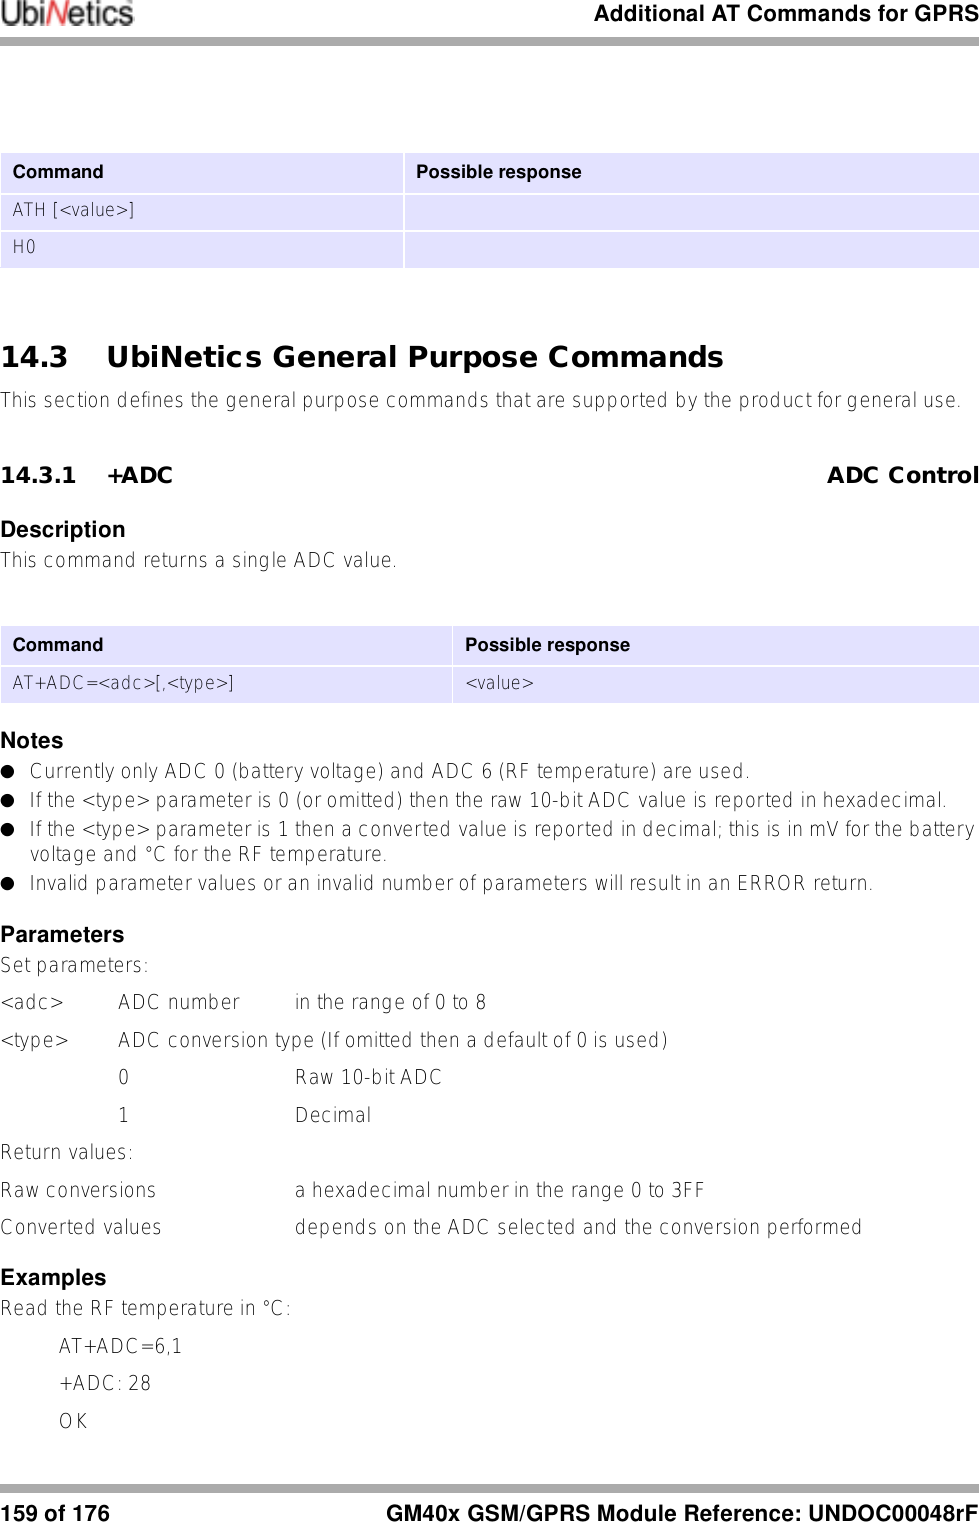 Additional AT Commands for GPRS159 of 176 GM40x GSM/GPRS Module Reference: UNDOC00048rF14.3 UbiNetics General Purpose CommandsThis section defines the general purpose commands that are supported by the product for general use.14.3.1 +ADC ADC ControlDescriptionThis command returns a single ADC value.Notes●Currently only ADC 0 (battery voltage) and ADC 6 (RF temperature) are used.●If the &lt;type&gt; parameter is 0 (or omitted) then the raw 10-bit ADC value is reported in hexadecimal.●If the &lt;type&gt; parameter is 1 then a converted value is reported in decimal; this is in mV for the battery voltage and °C for the RF temperature. ●Invalid parameter values or an invalid number of parameters will result in an ERROR return.ParametersSet parameters:&lt;adc&gt; ADC number in the range of 0 to 8&lt;type&gt;  ADC conversion type (If omitted then a default of 0 is used)0 Raw 10-bit ADC1 Decimal Return values:Raw conversions a hexadecimal number in the range 0 to 3FFConverted values  depends on the ADC selected and the conversion performedExamplesRead the RF temperature in °C:AT+ADC=6,1+ADC: 28OKCommand  Possible responseATH [&lt;value&gt;]H0Command Possible responseAT+ADC=&lt;adc&gt;[,&lt;type&gt;] &lt;value&gt;